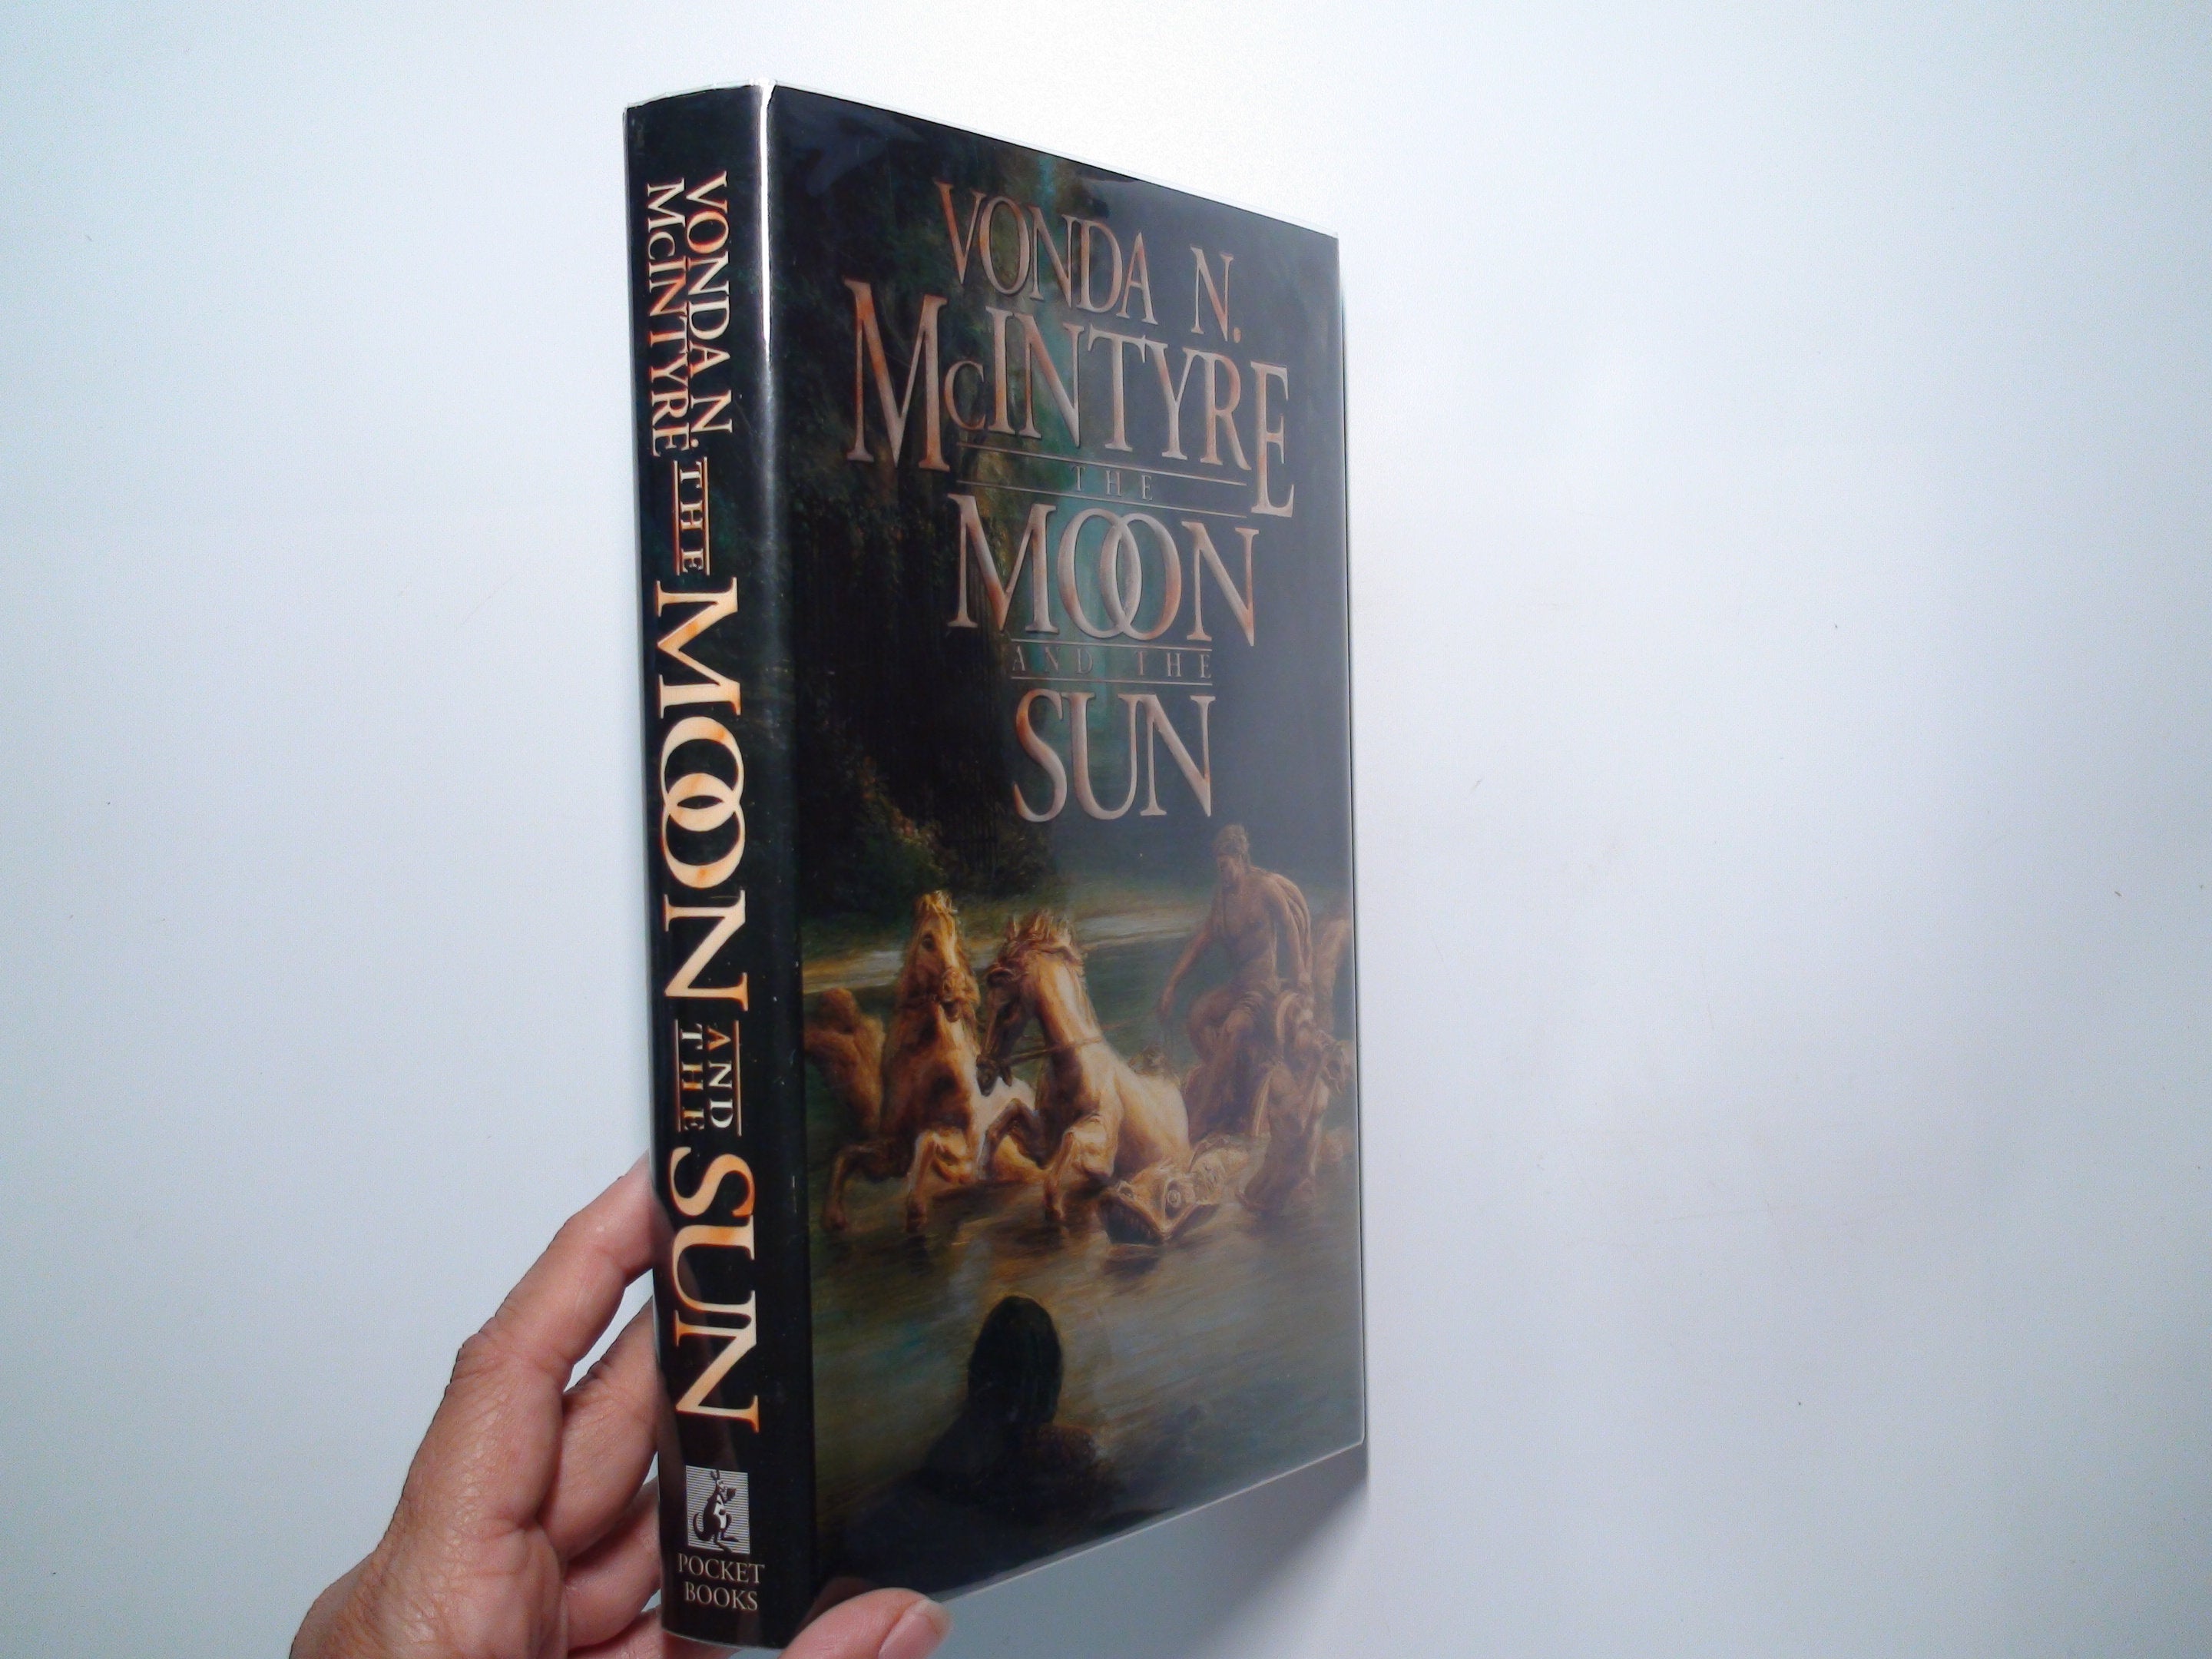 The Moon and the Sun, SIGNED by Vonda N. McIntyre, 1st Ed, w D/J, 1997